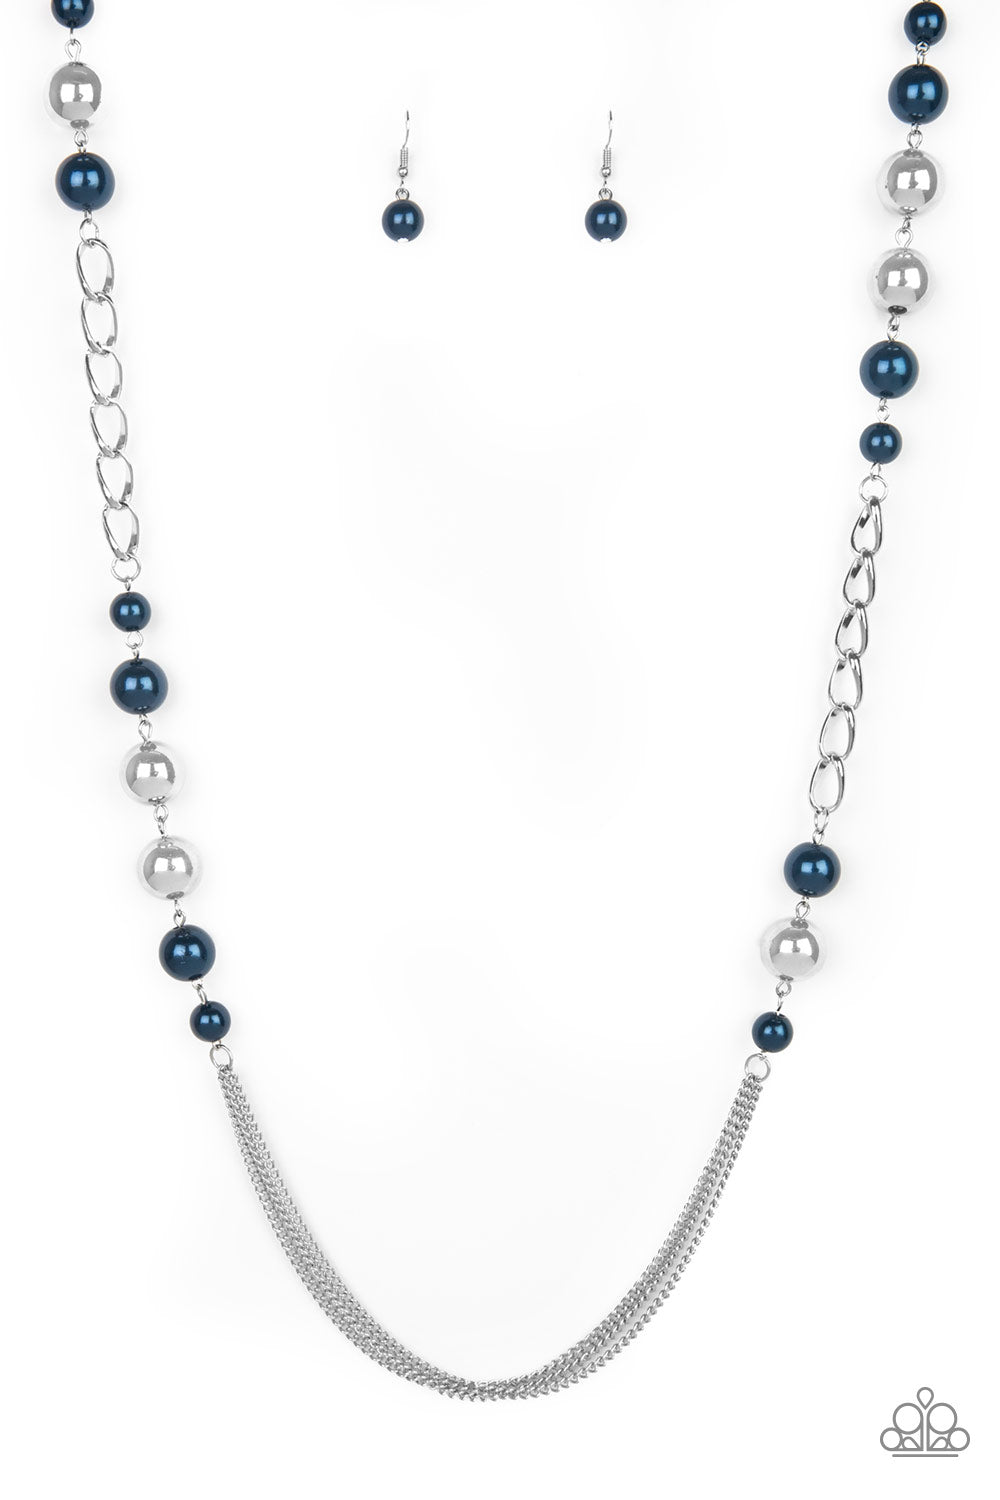 blue pearl necklace and earrings